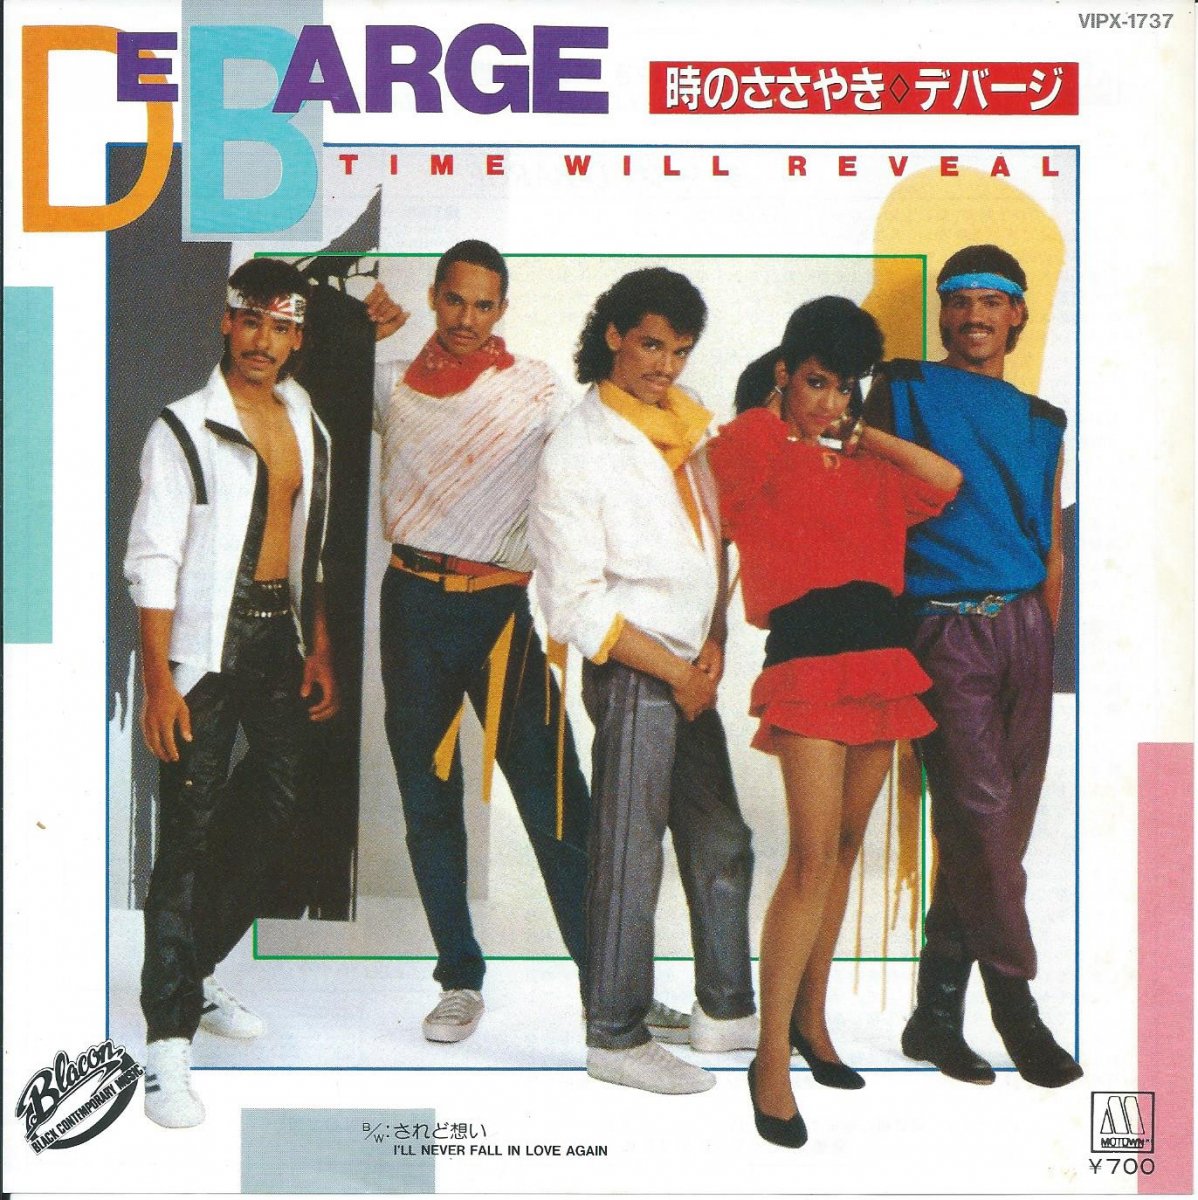 ǥС DEBARGE / Τ䤭 TIME WILL REVEAL / ۤ I'LL NEVER FALL IN LOVE AGAIN (7